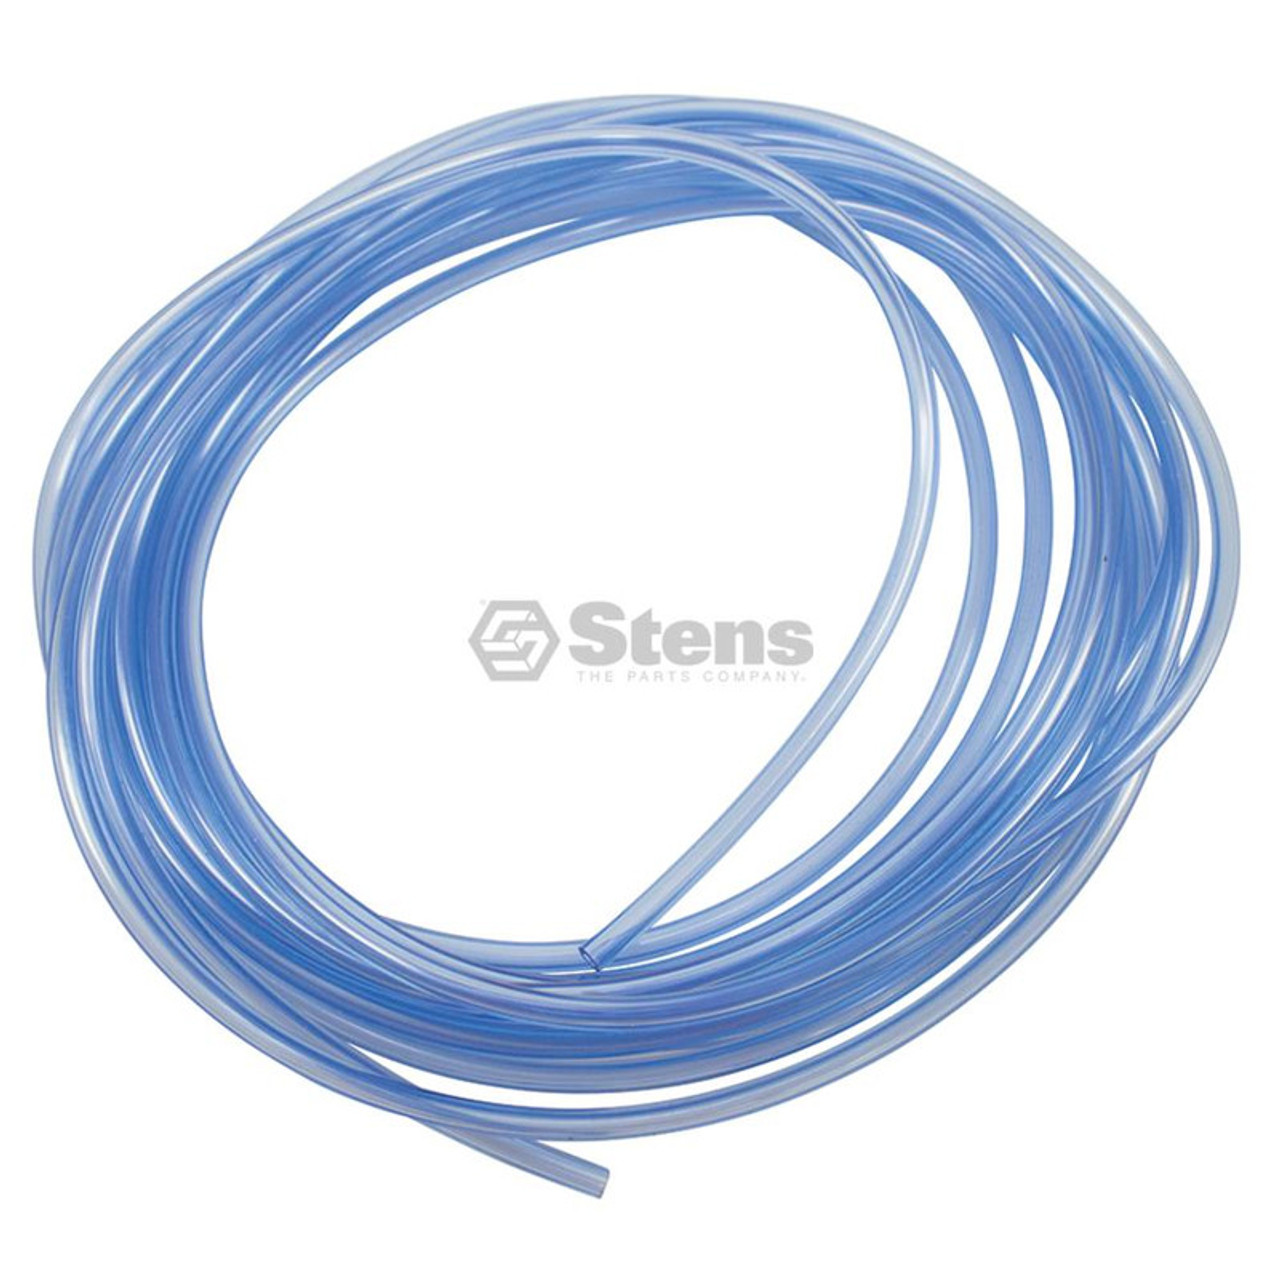 Fuel Line ID: 1/8" OD: 1/4" 25 feet long, Translucent blue, High quality, Resists swelling and hardening, Made in USA 115-516